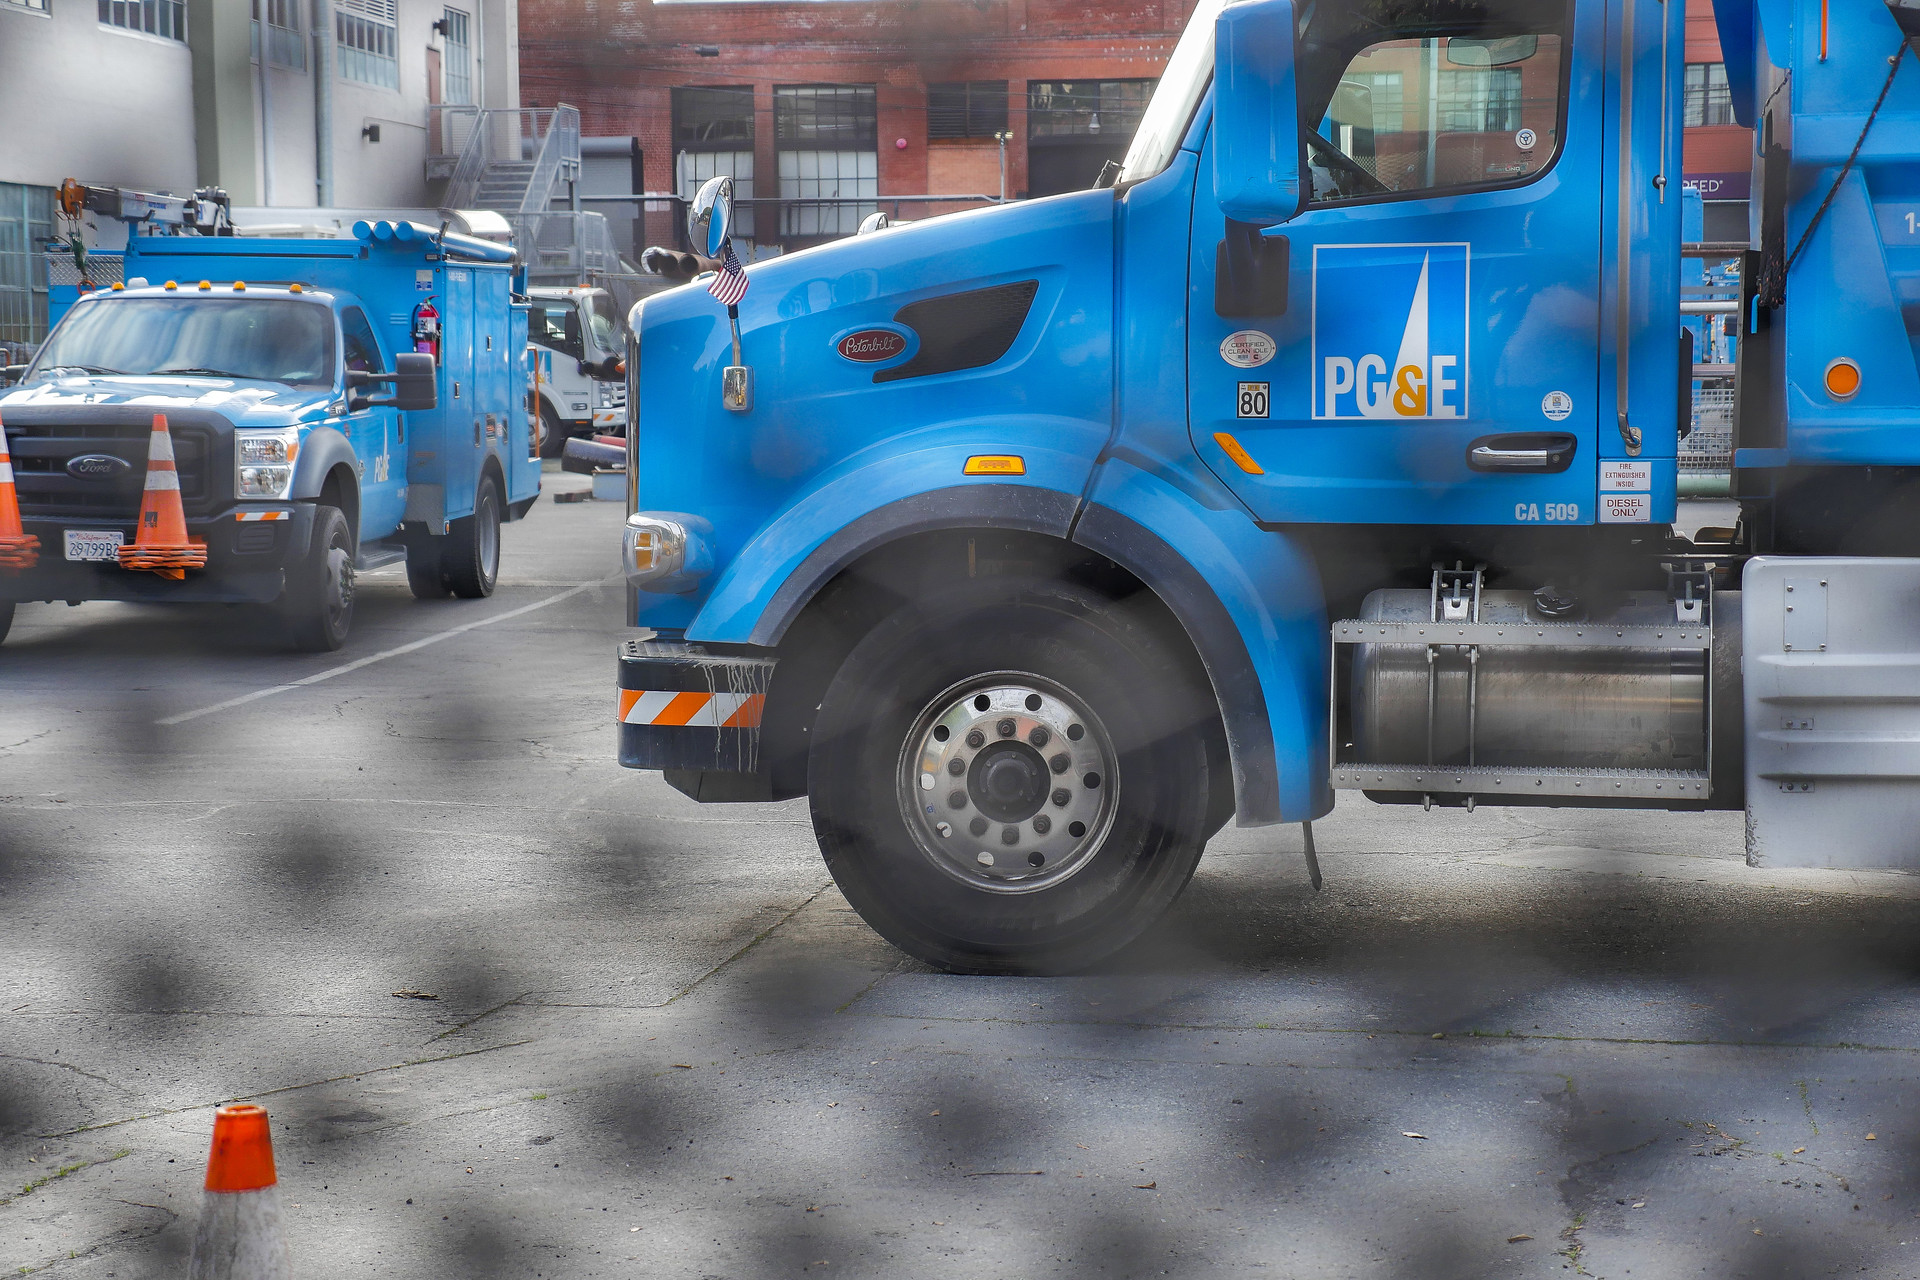 Blue trucks with 'pg and e' logo on them sit parked in a lot with the white and black blurry pattern of a fence in the foreground